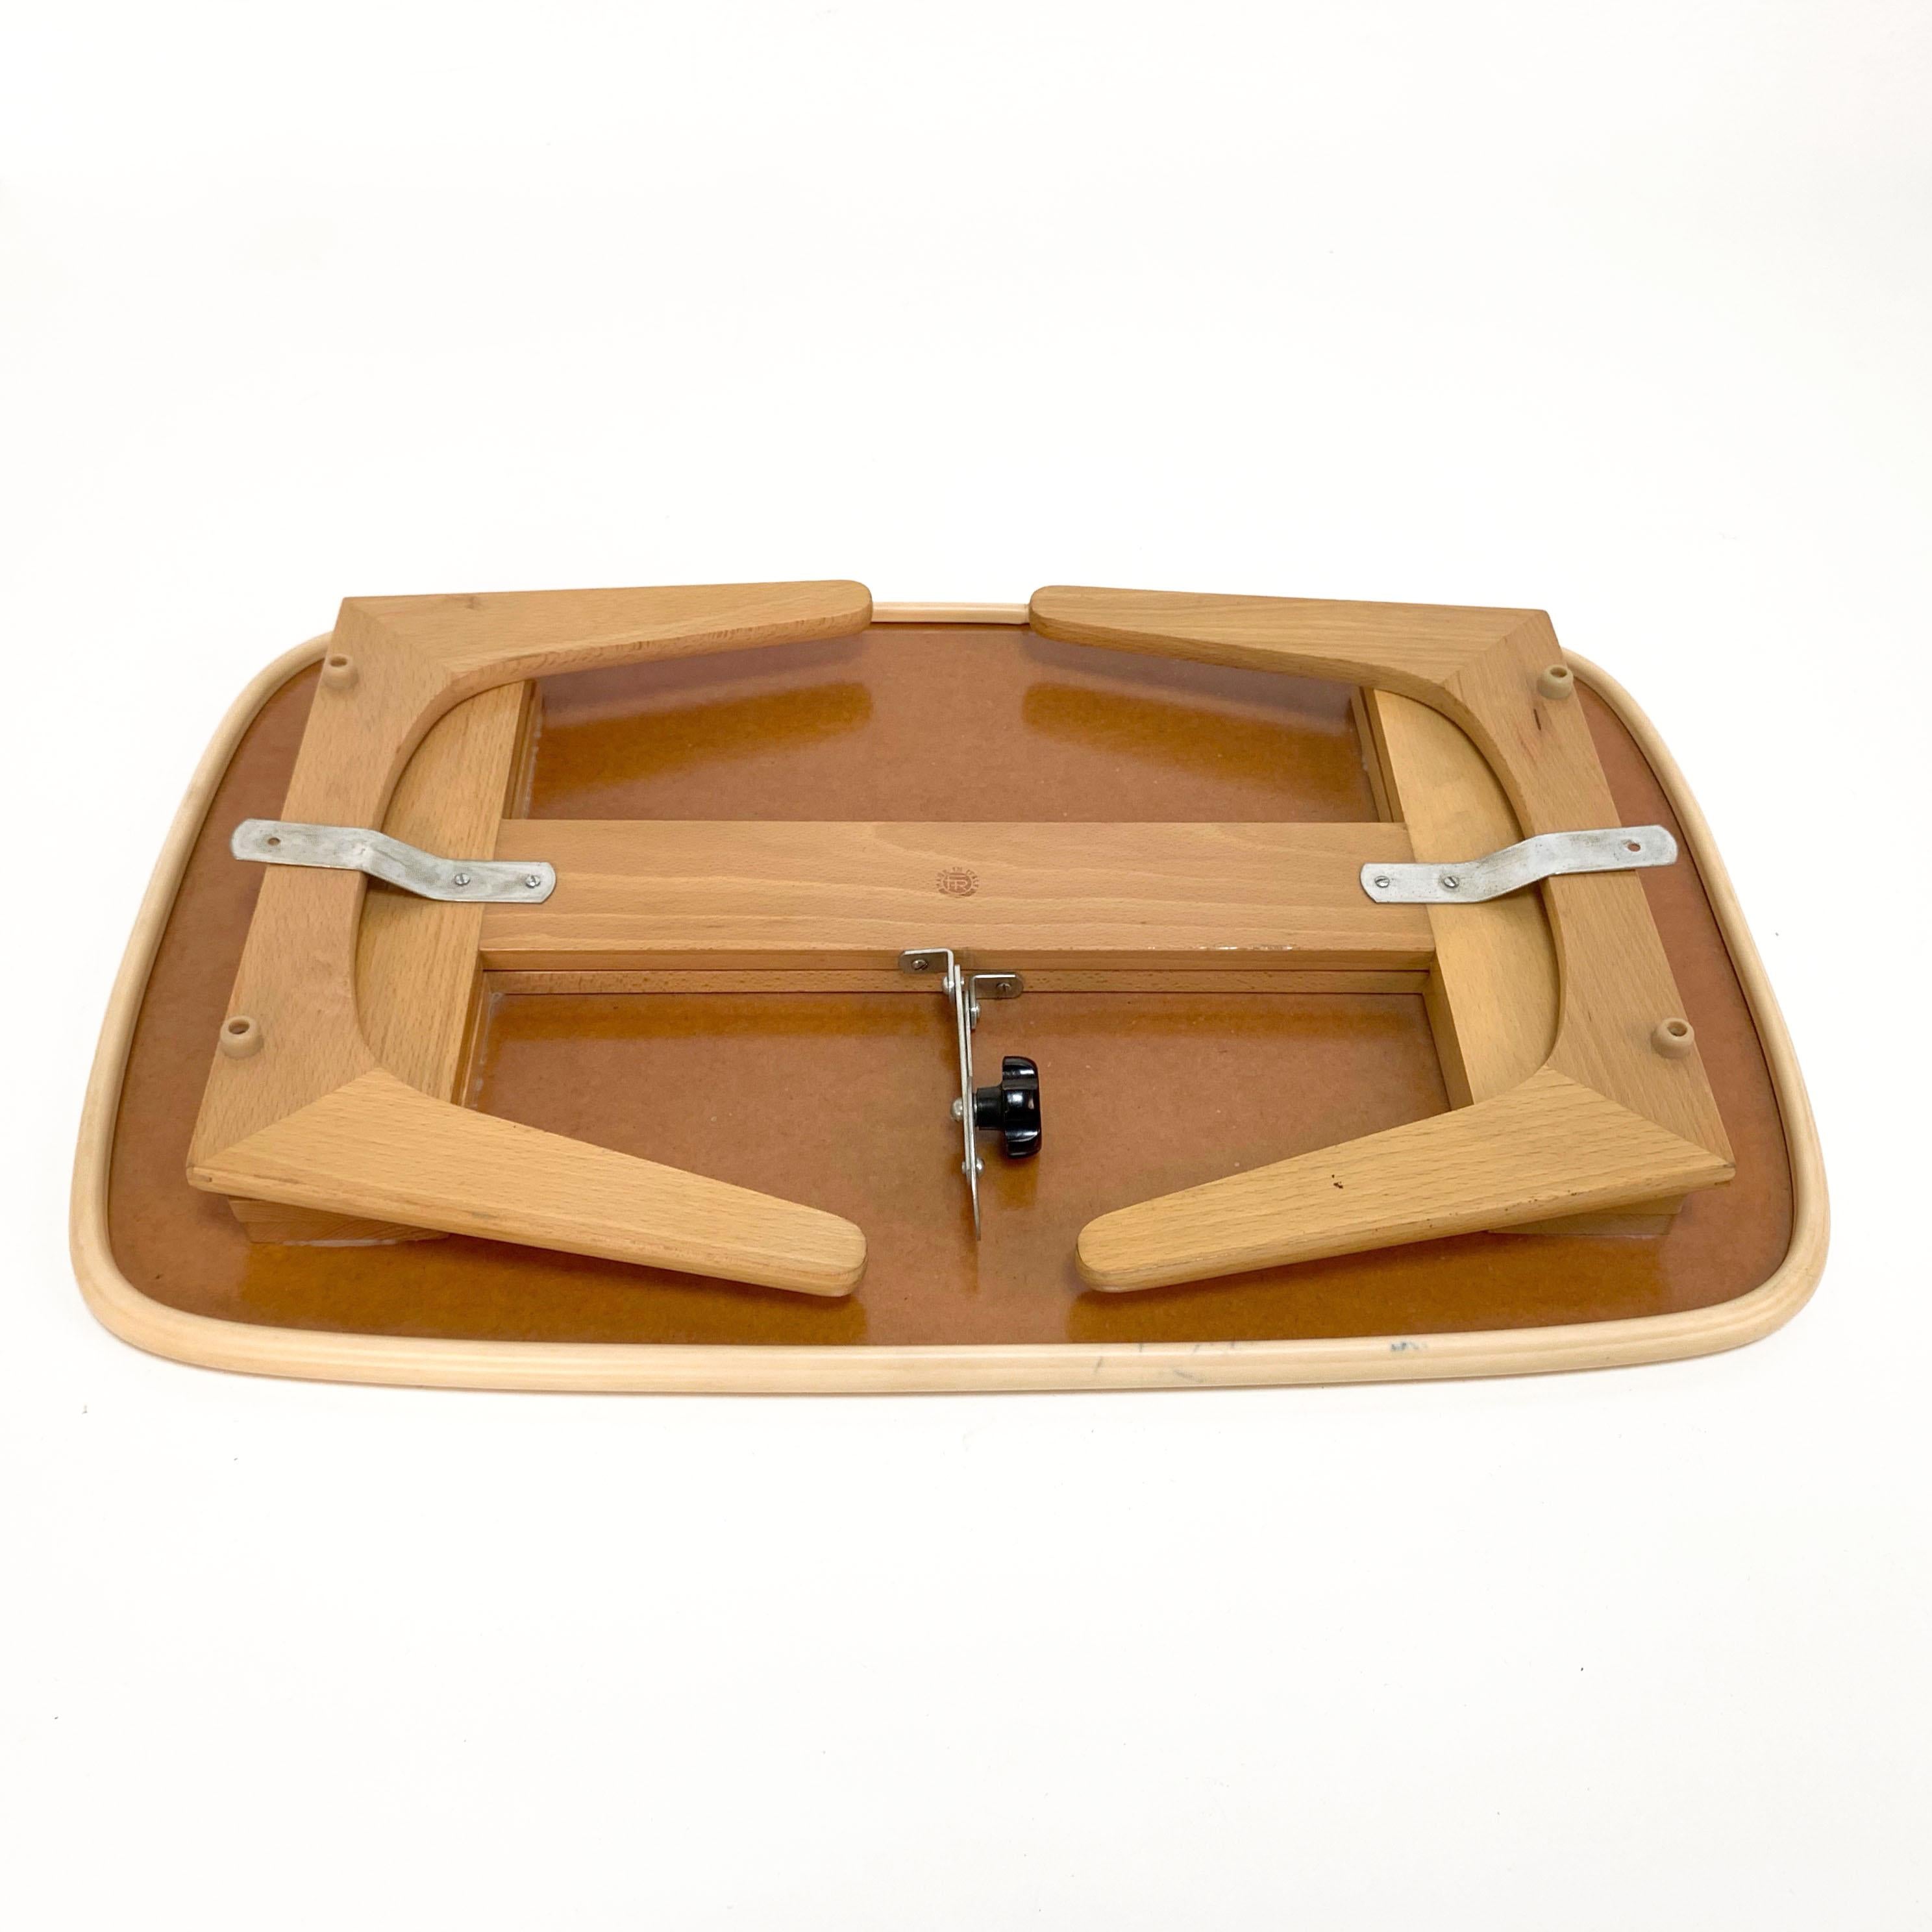 Folding and Adjustable Bed Tray, Laminated Wood, Fratelli Reguitti, Italy, 1950s For Sale 2